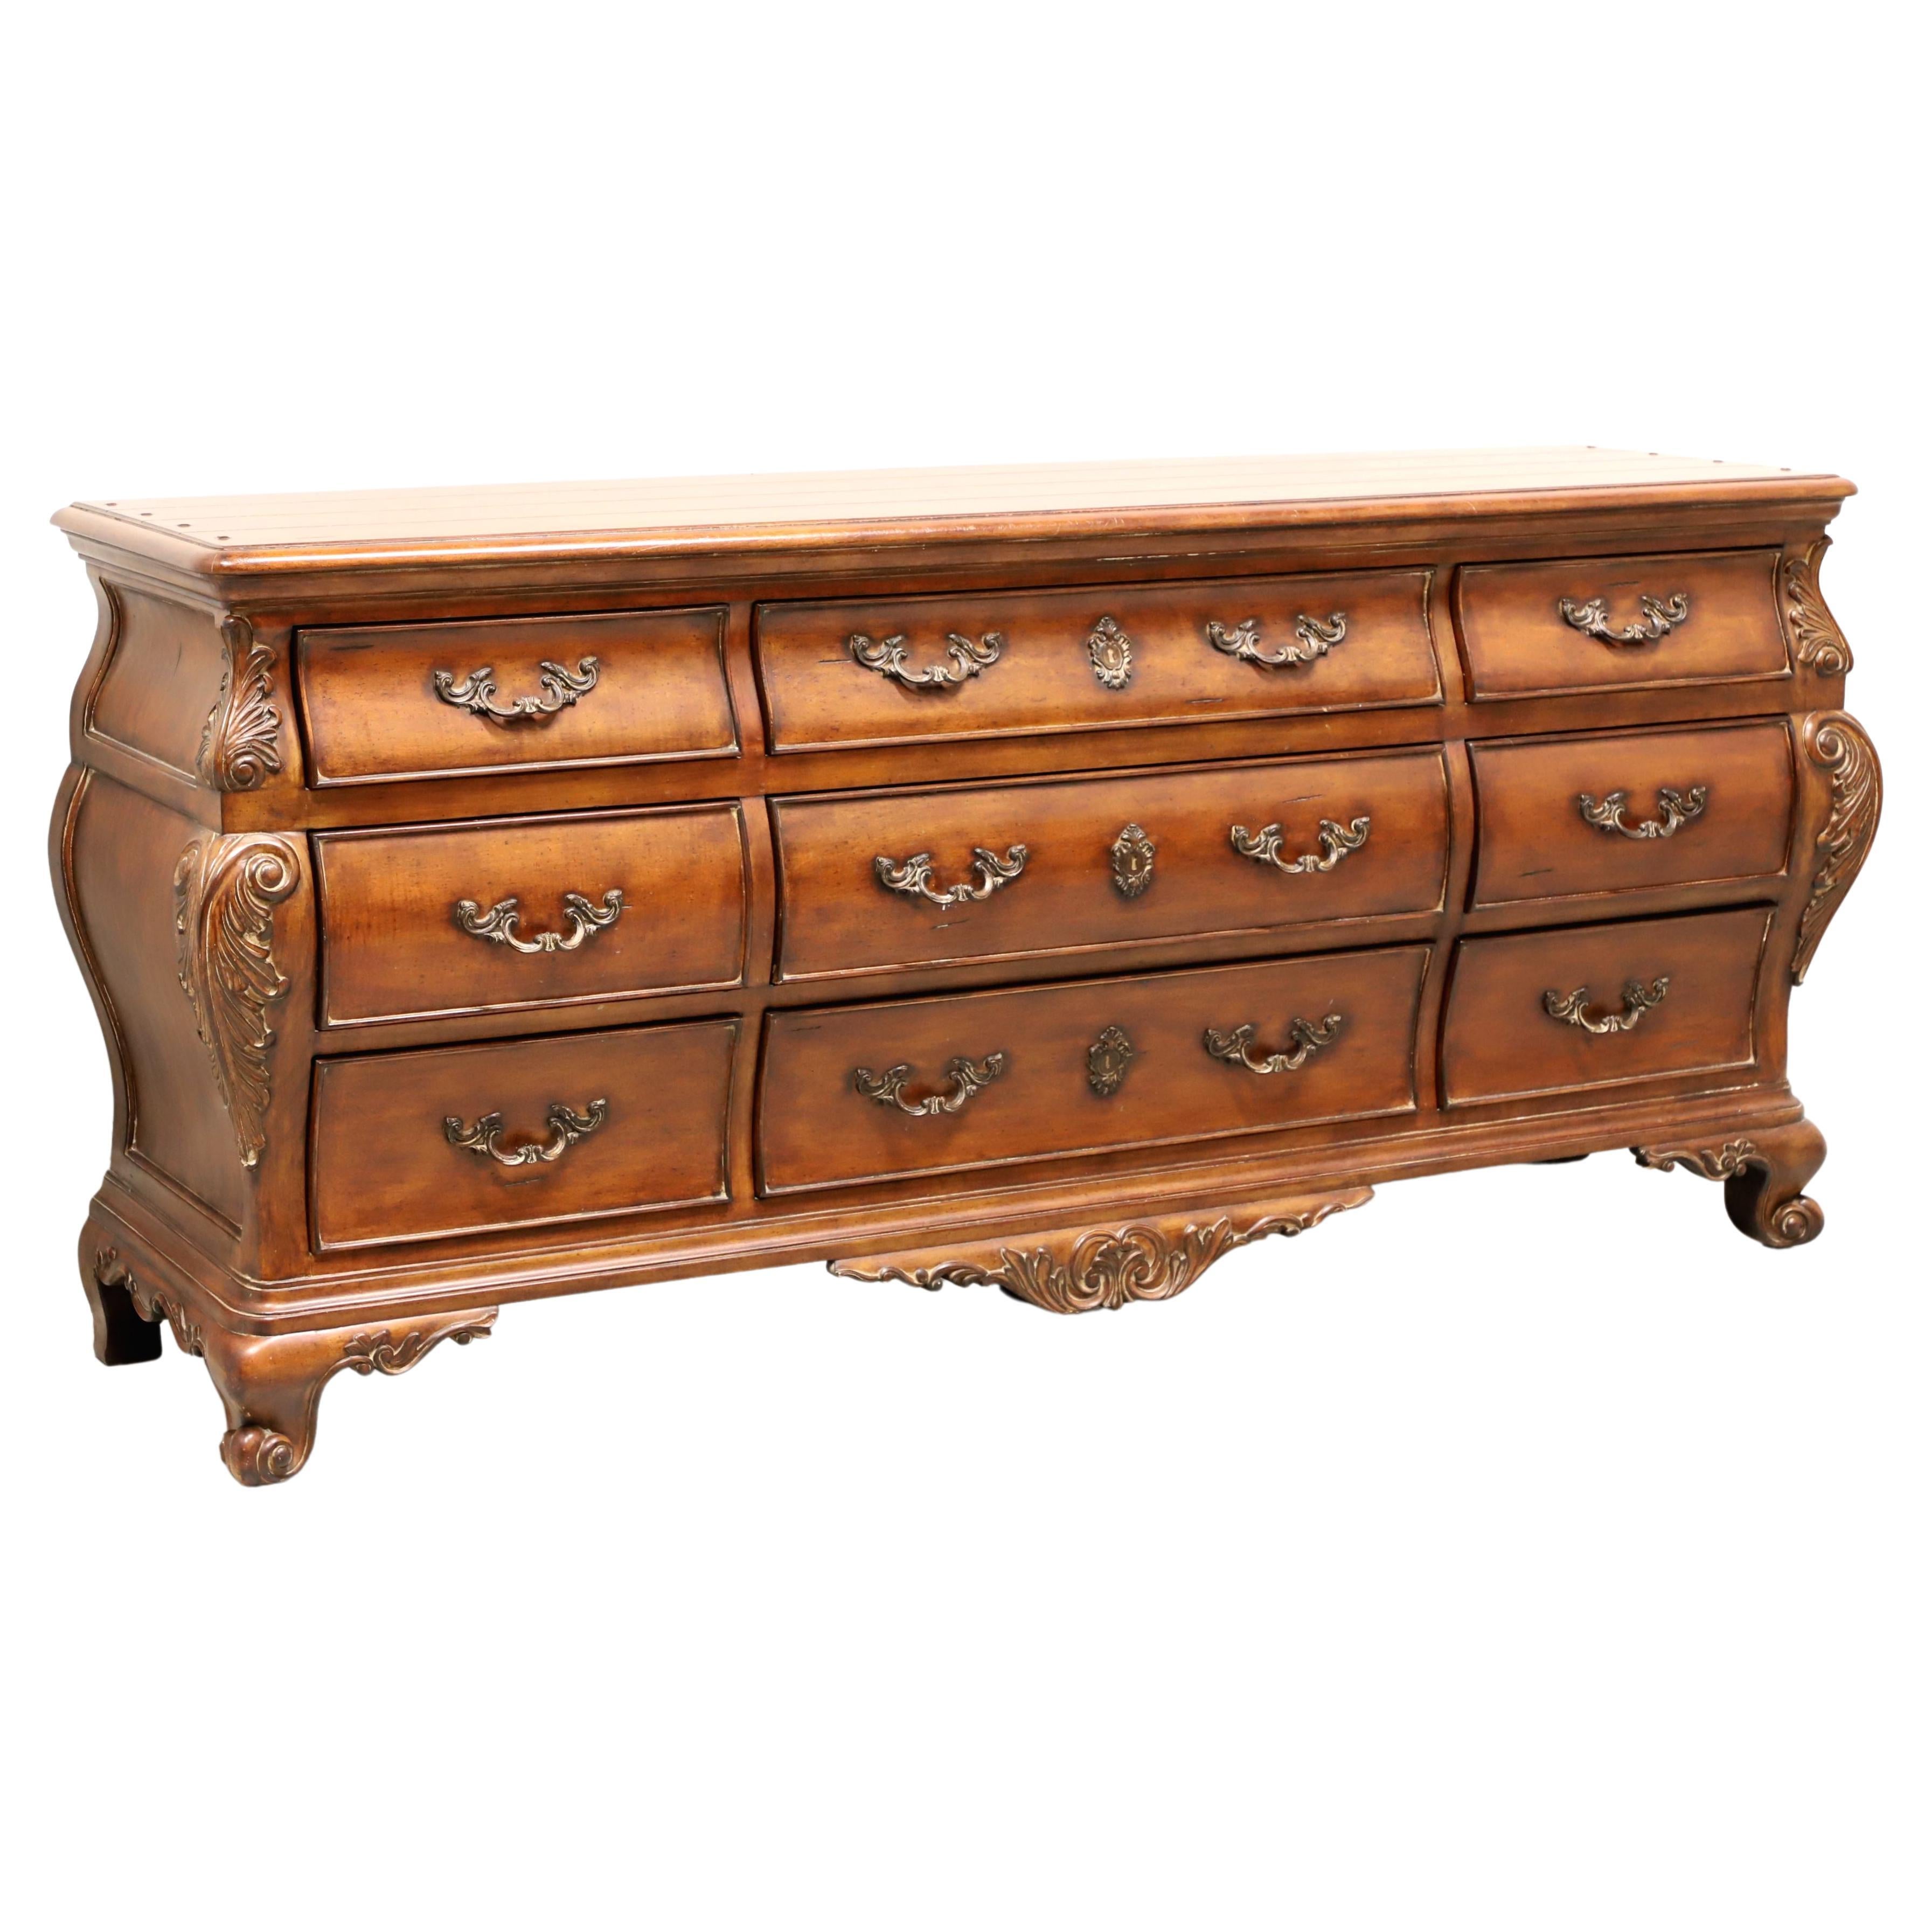 THOMASVILLE Chateau Provence French Country Triple Dresser